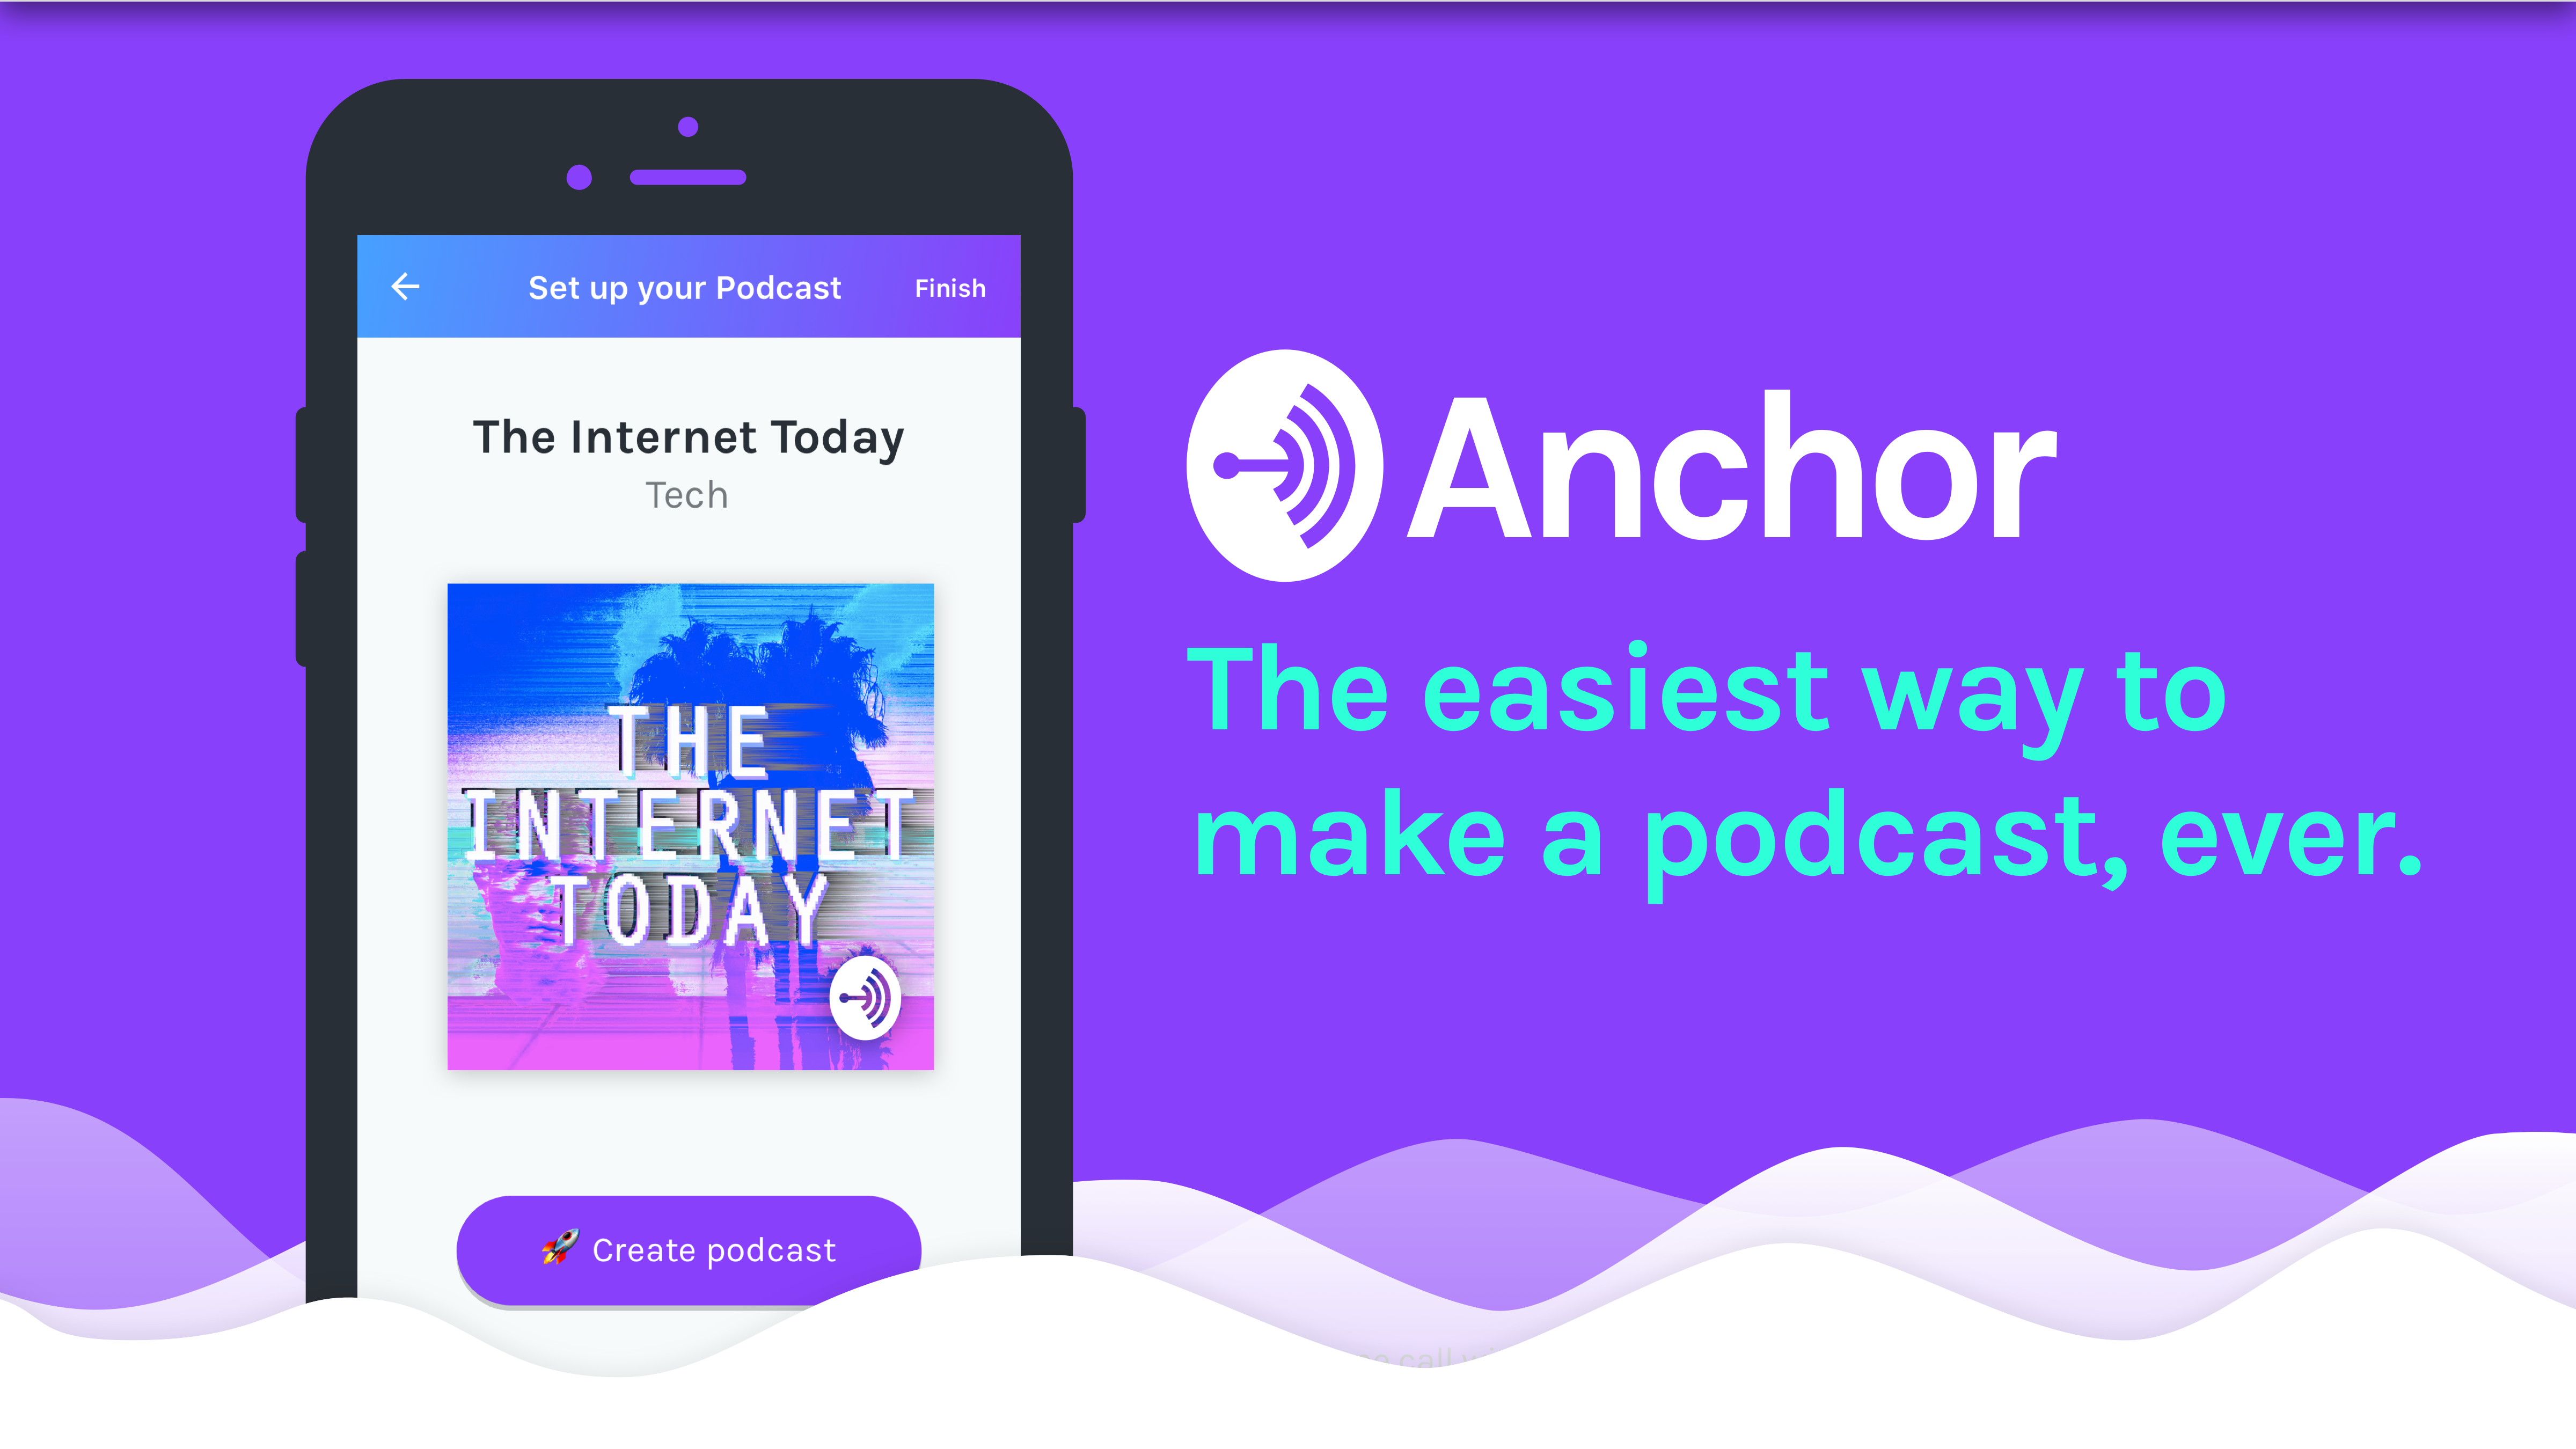 Anchor is now the easiest way to make a podcast, ever.